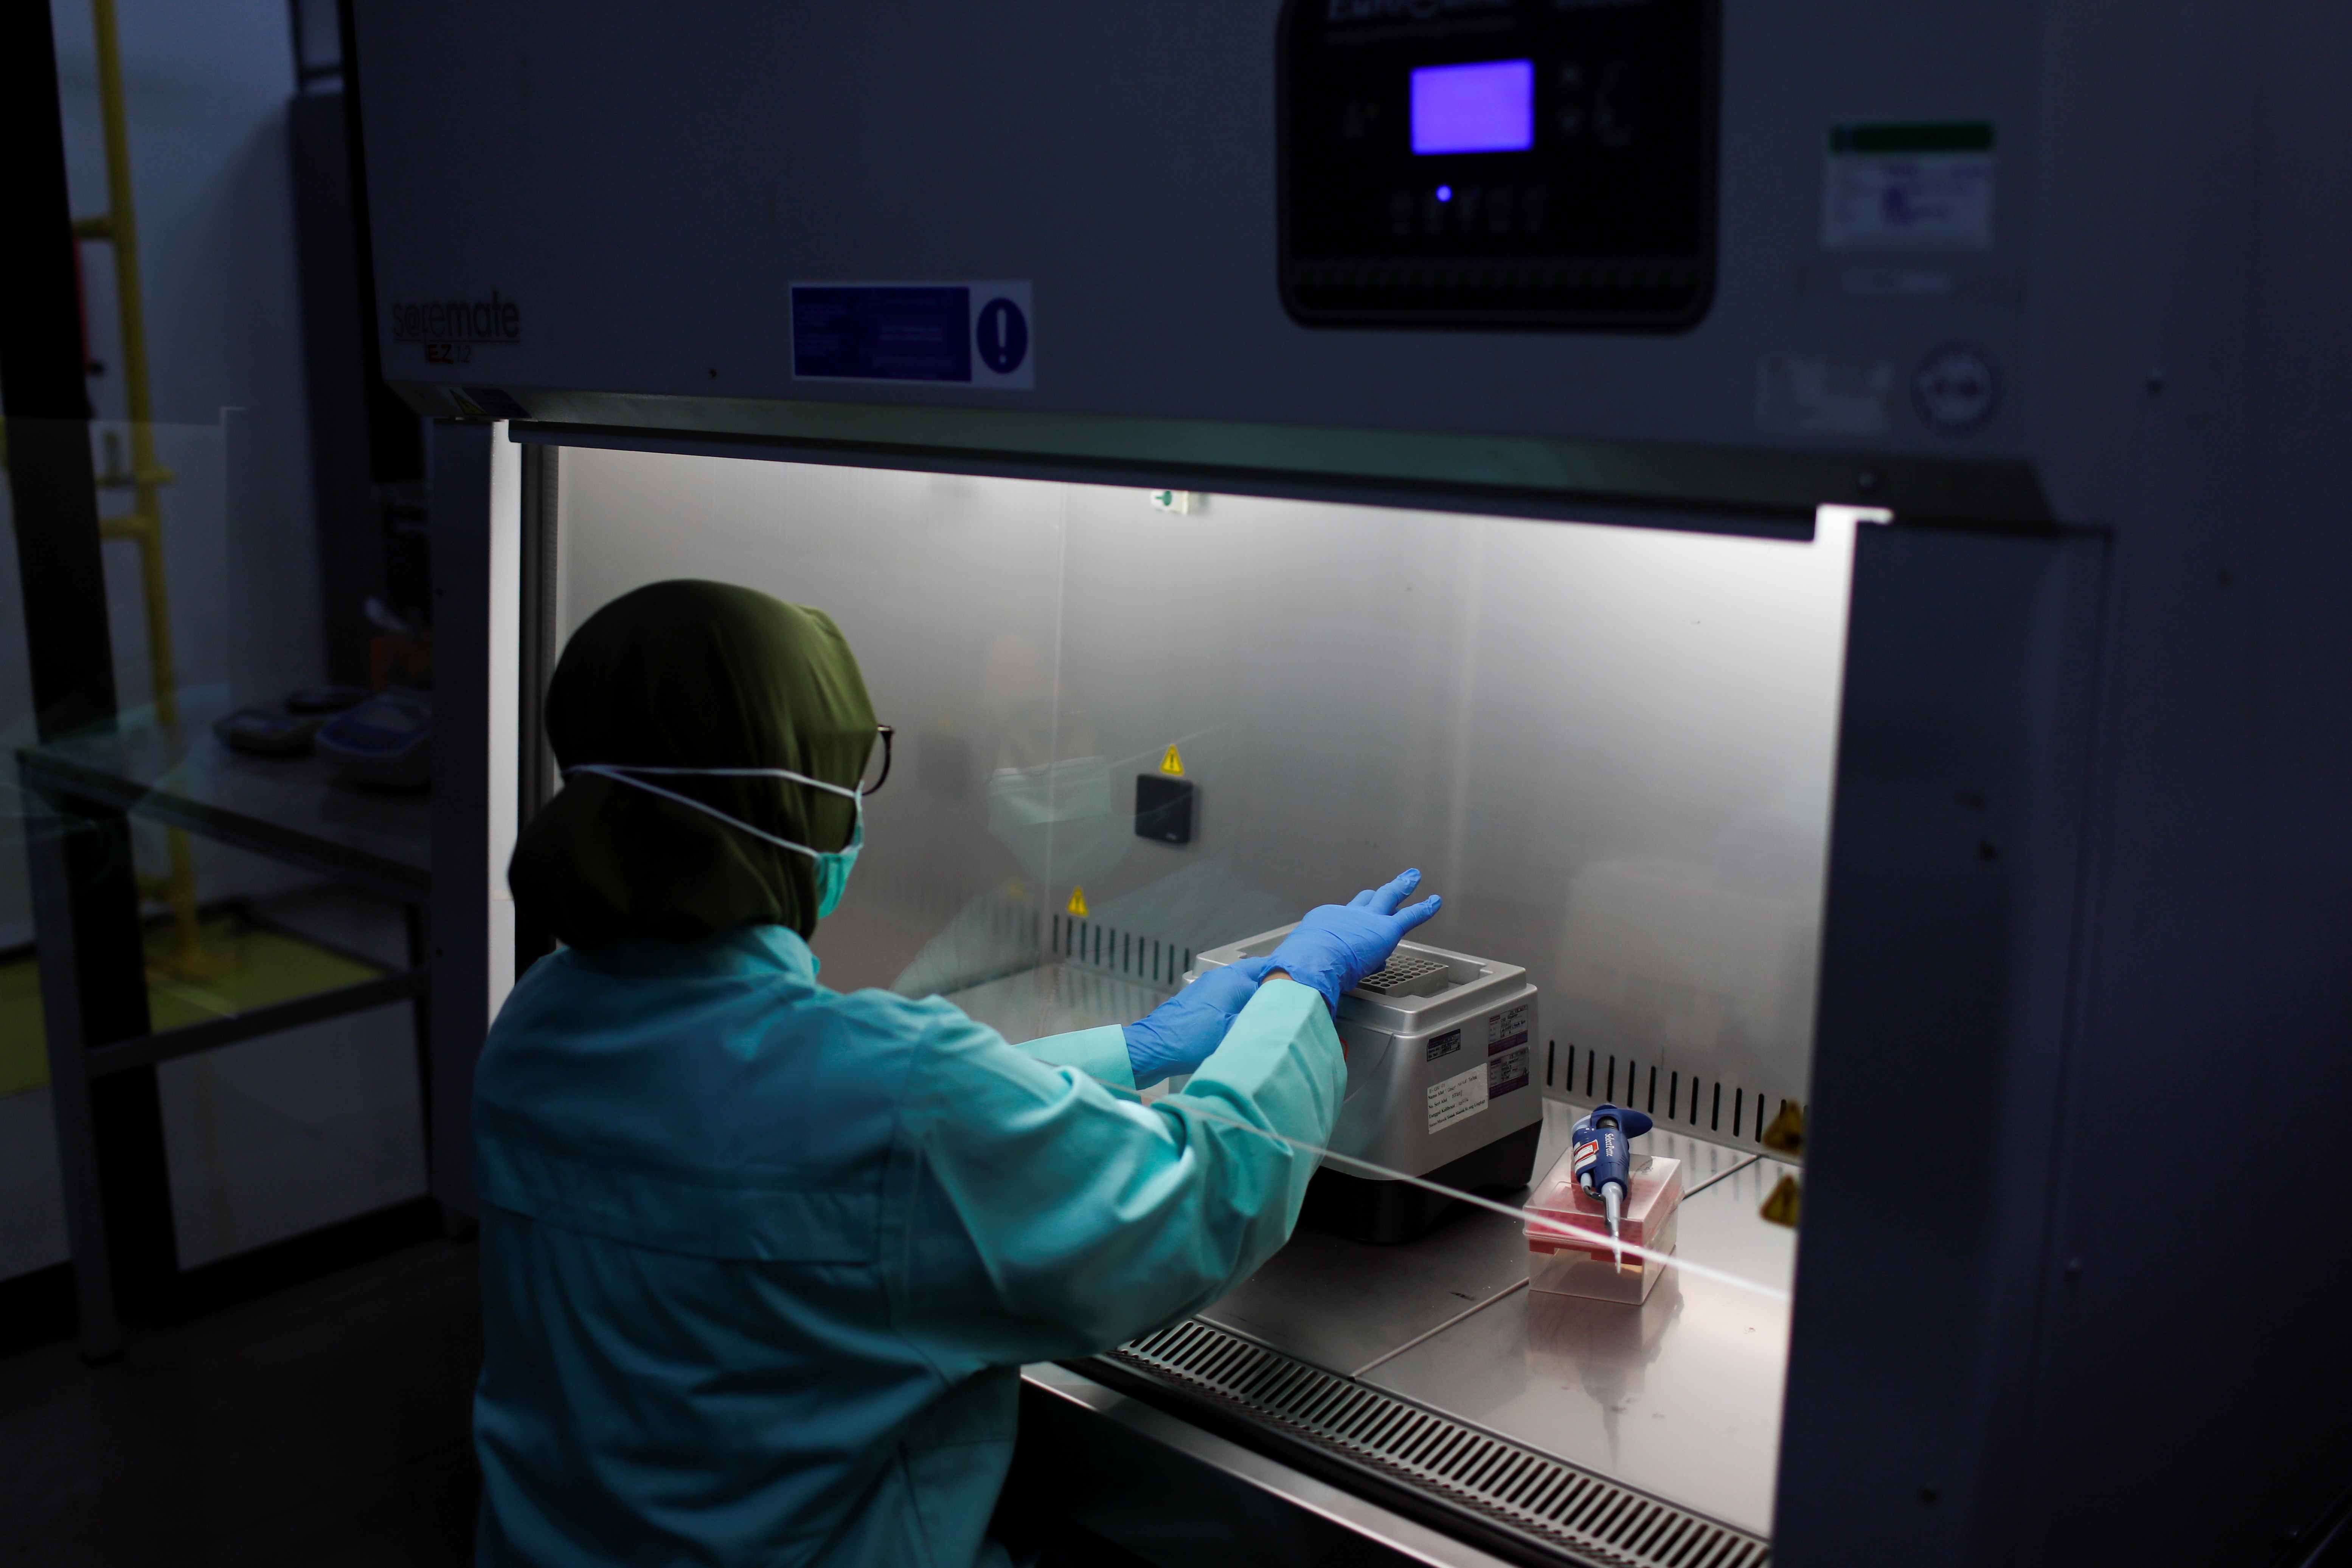 Analyst of Global Halal Centre works using a biosafety cabinet at a laboratorium, in Bogor